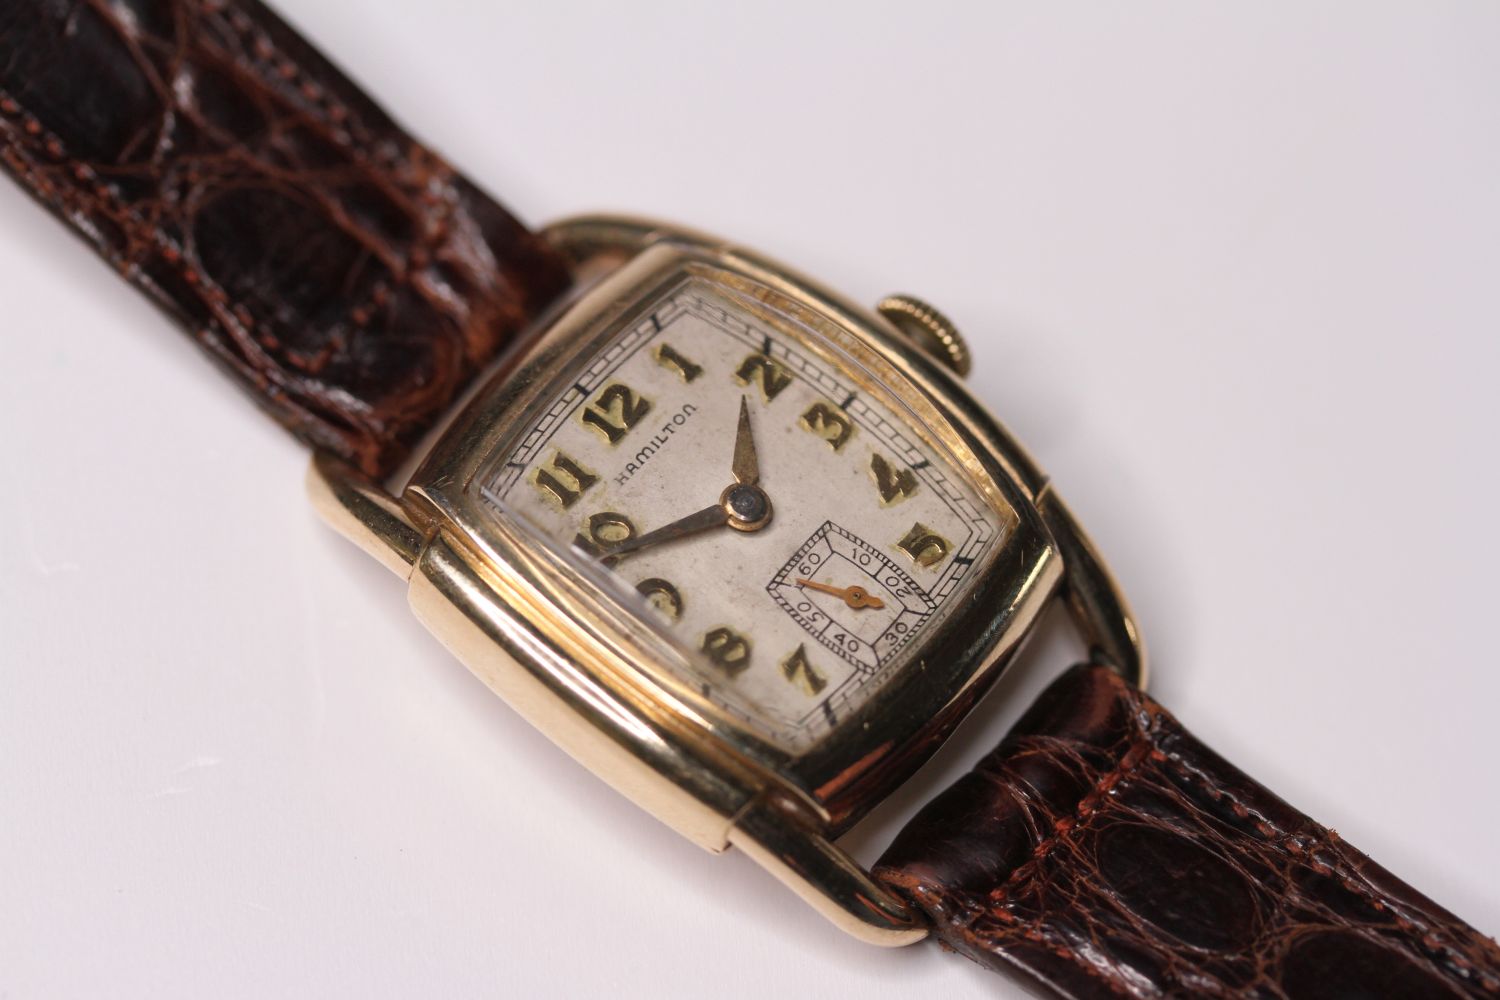 VINTAGE HAMILTON ART DECO DRESS WATCH, cushion dial with gold arabic numerals, subsidiary seconds